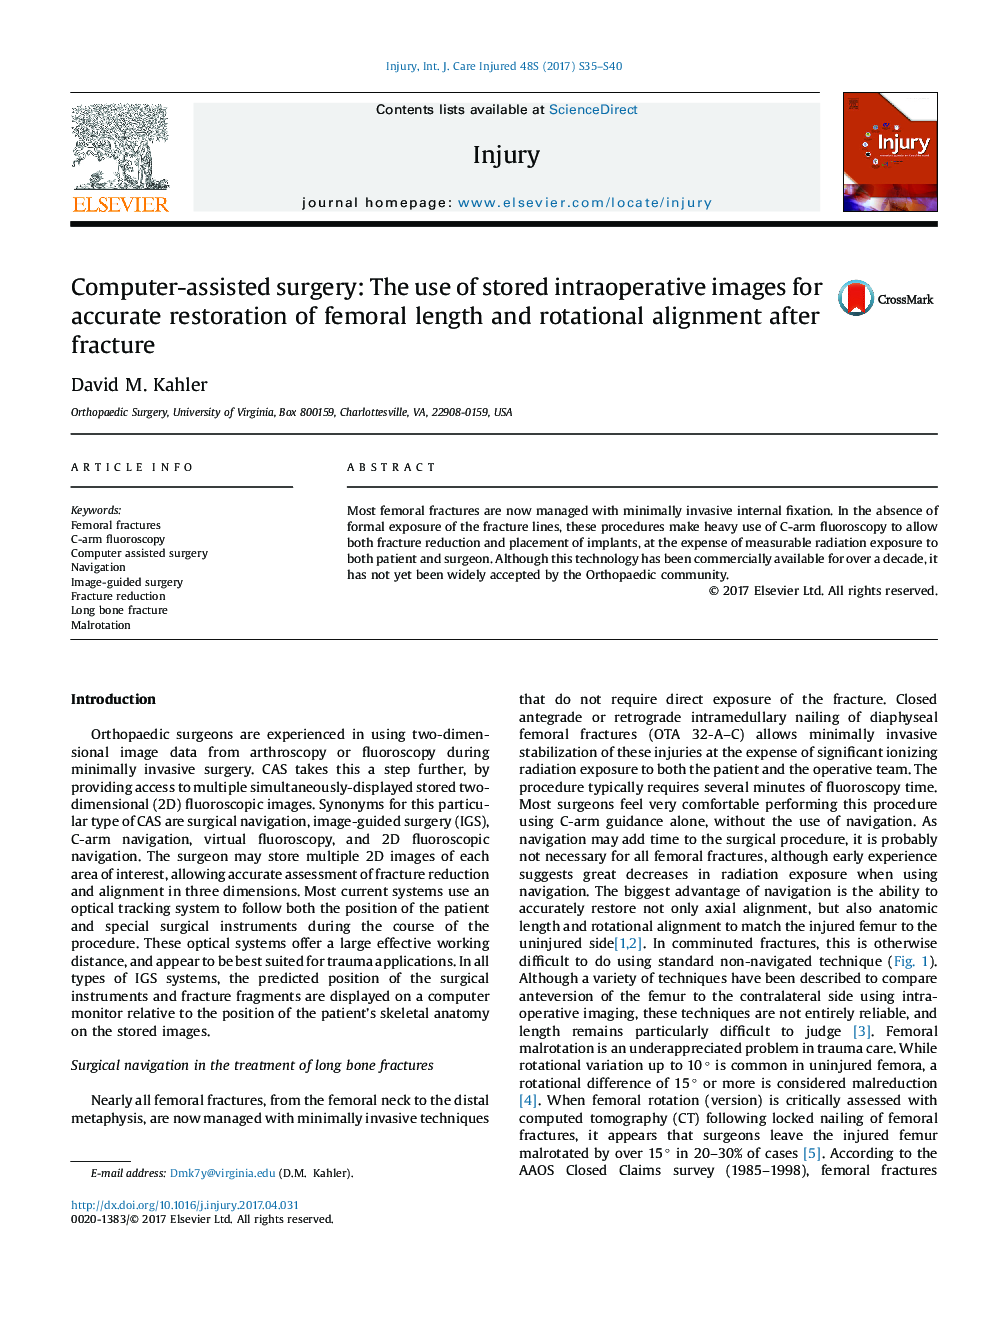 Computer-assisted surgery: The use of stored intraoperative images for accurate restoration of femoral length and rotational alignment after fracture